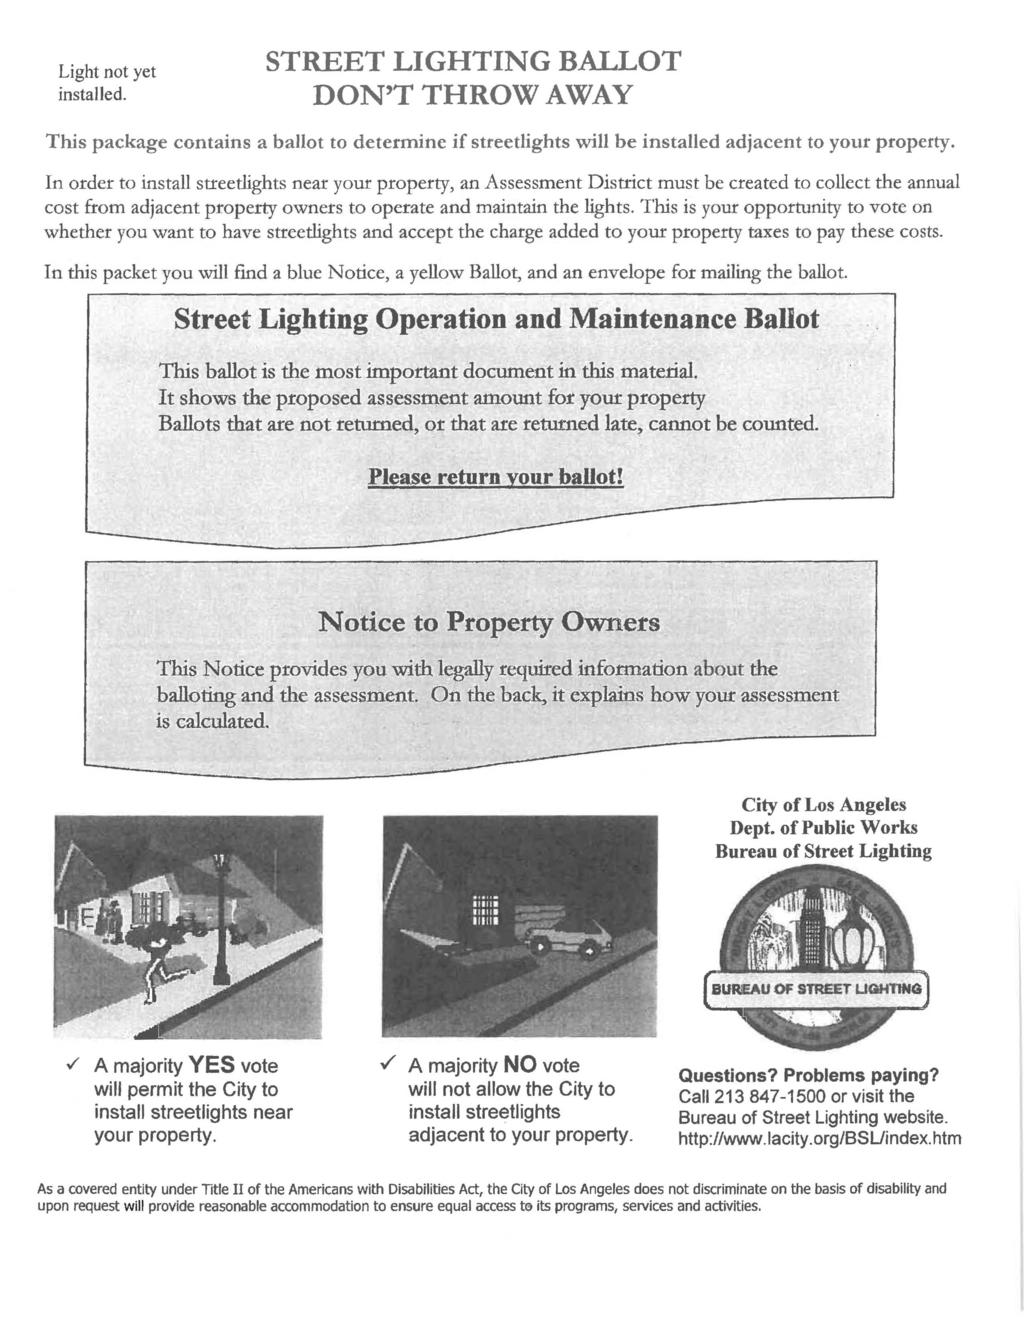 Light not yet installed. STREET LIGHTING BALLT DN T THRW AWAY This package contains a ballot to determine if streetlights will be installed adjacent to your property.